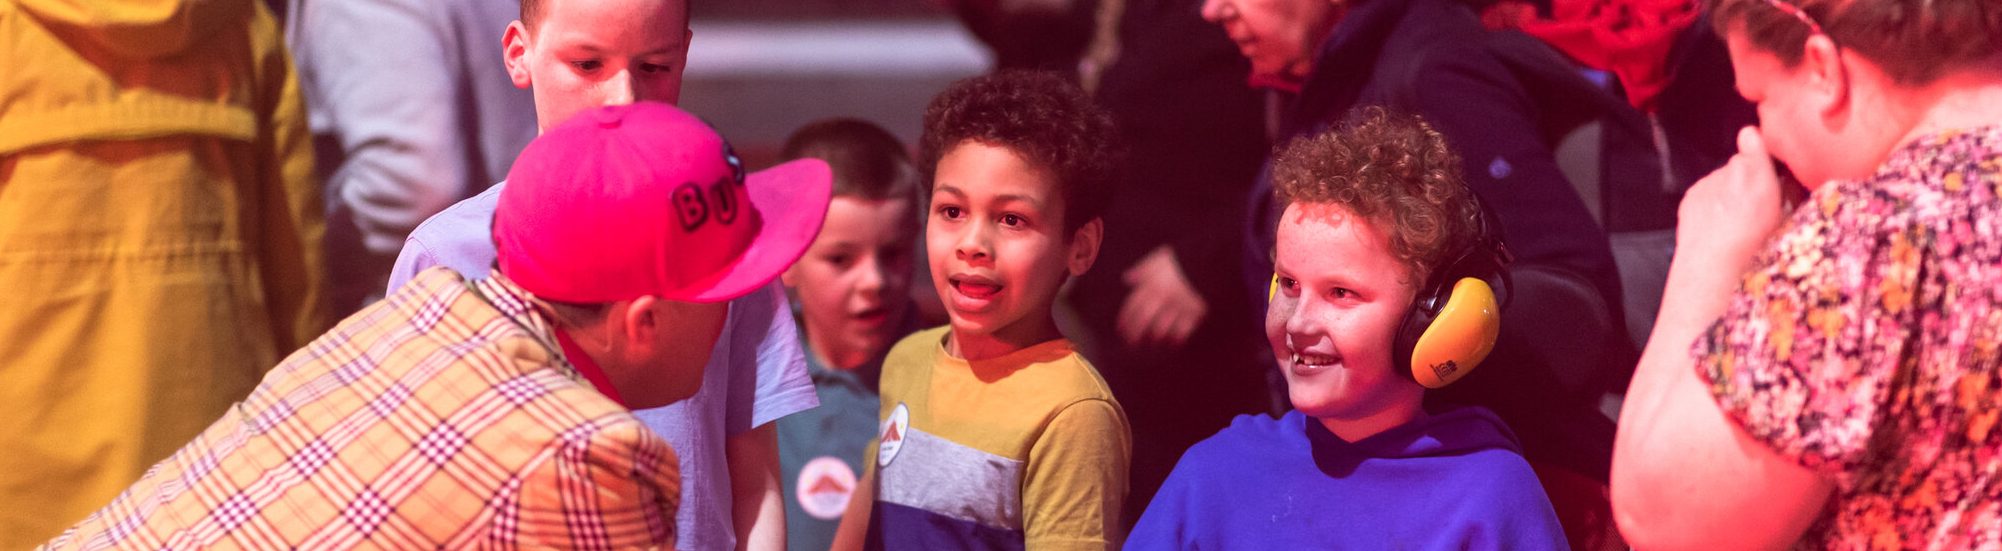 A little boy wearing ear defenders smiles at the circus clown.